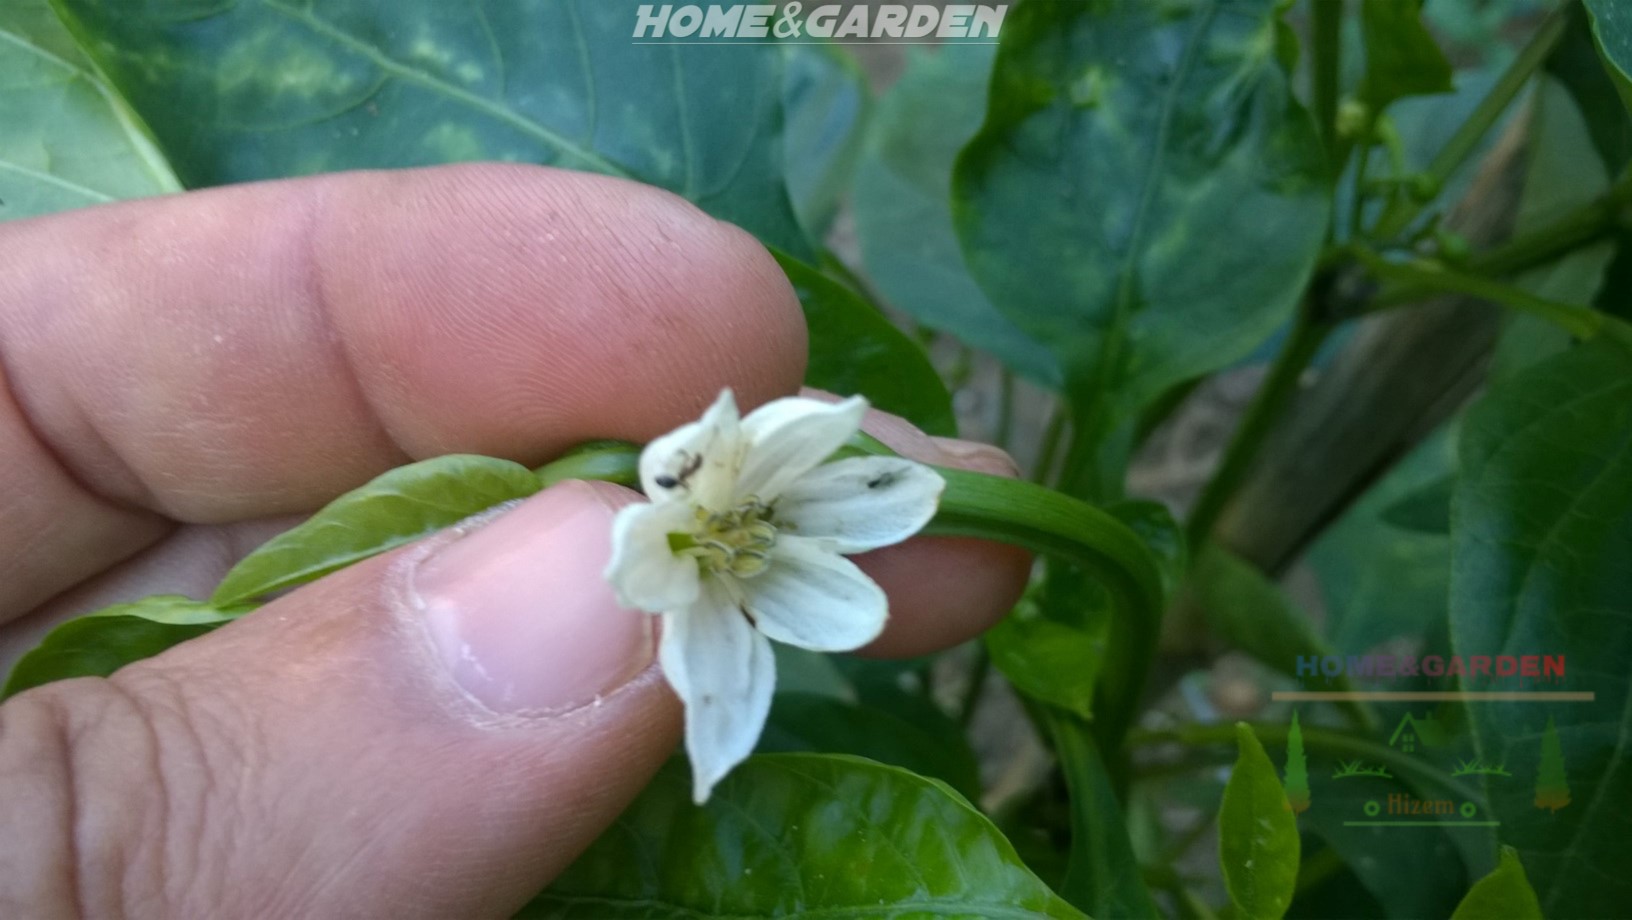 Pinch off all early blossoms that appear on your pepper plants. Don't worry, this won’t harm the plants. In fact, it helps them direct their energy into growing, and you will get lots of large fruits later.